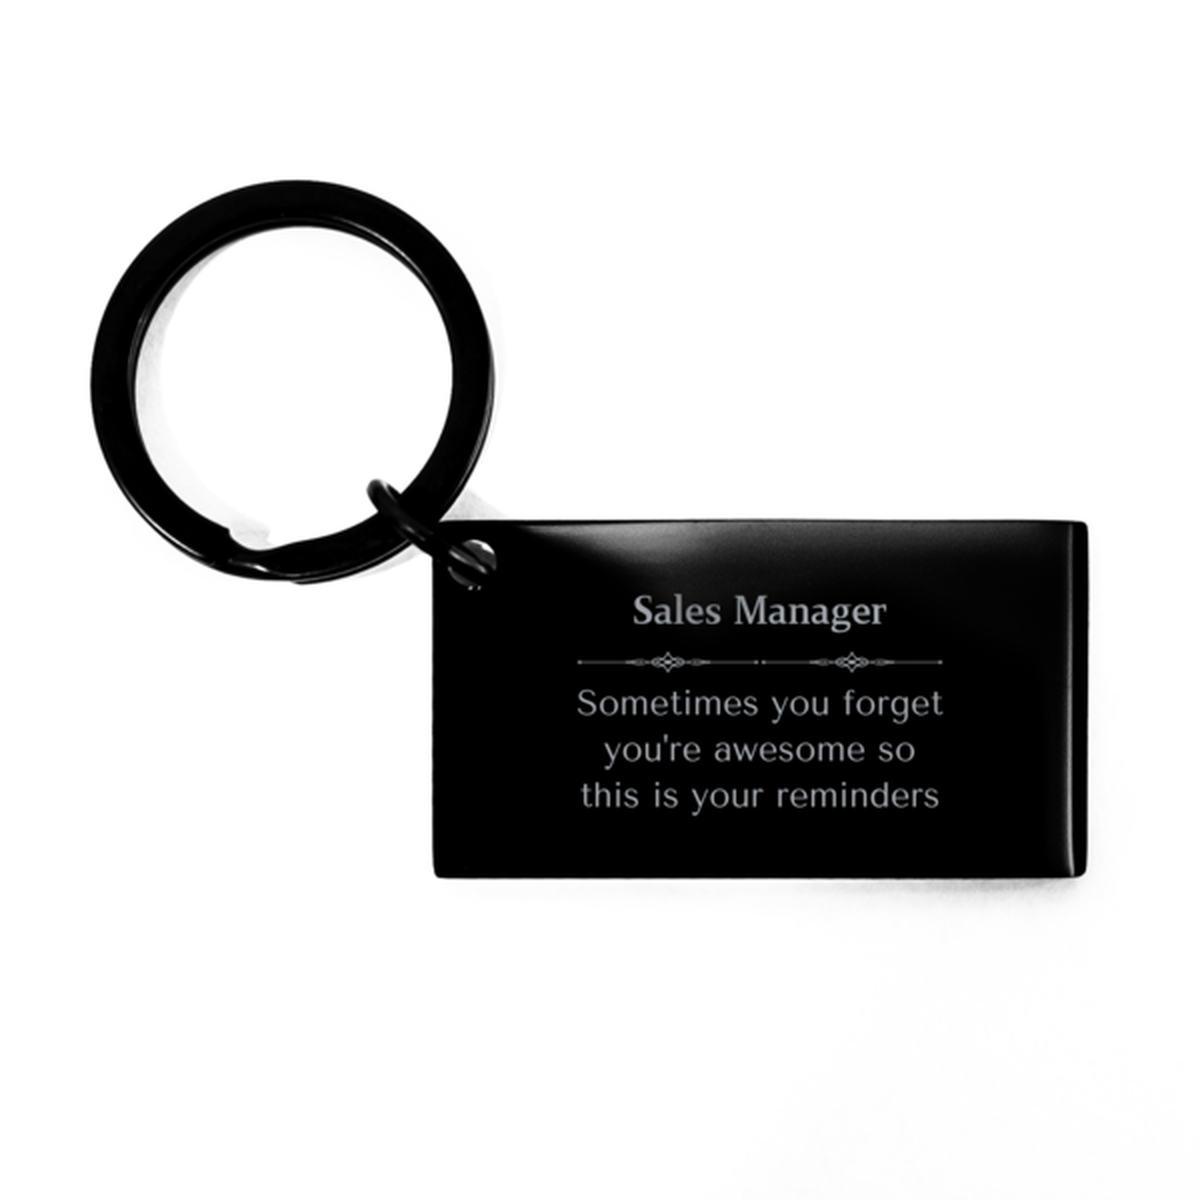 Sentimental Sales Manager Keychain, Tour Guide Sometimes you forget you're awesome so this is your reminders, Graduation Christmas Birthday Gifts for Sales Manager, Men, Women, Coworkers